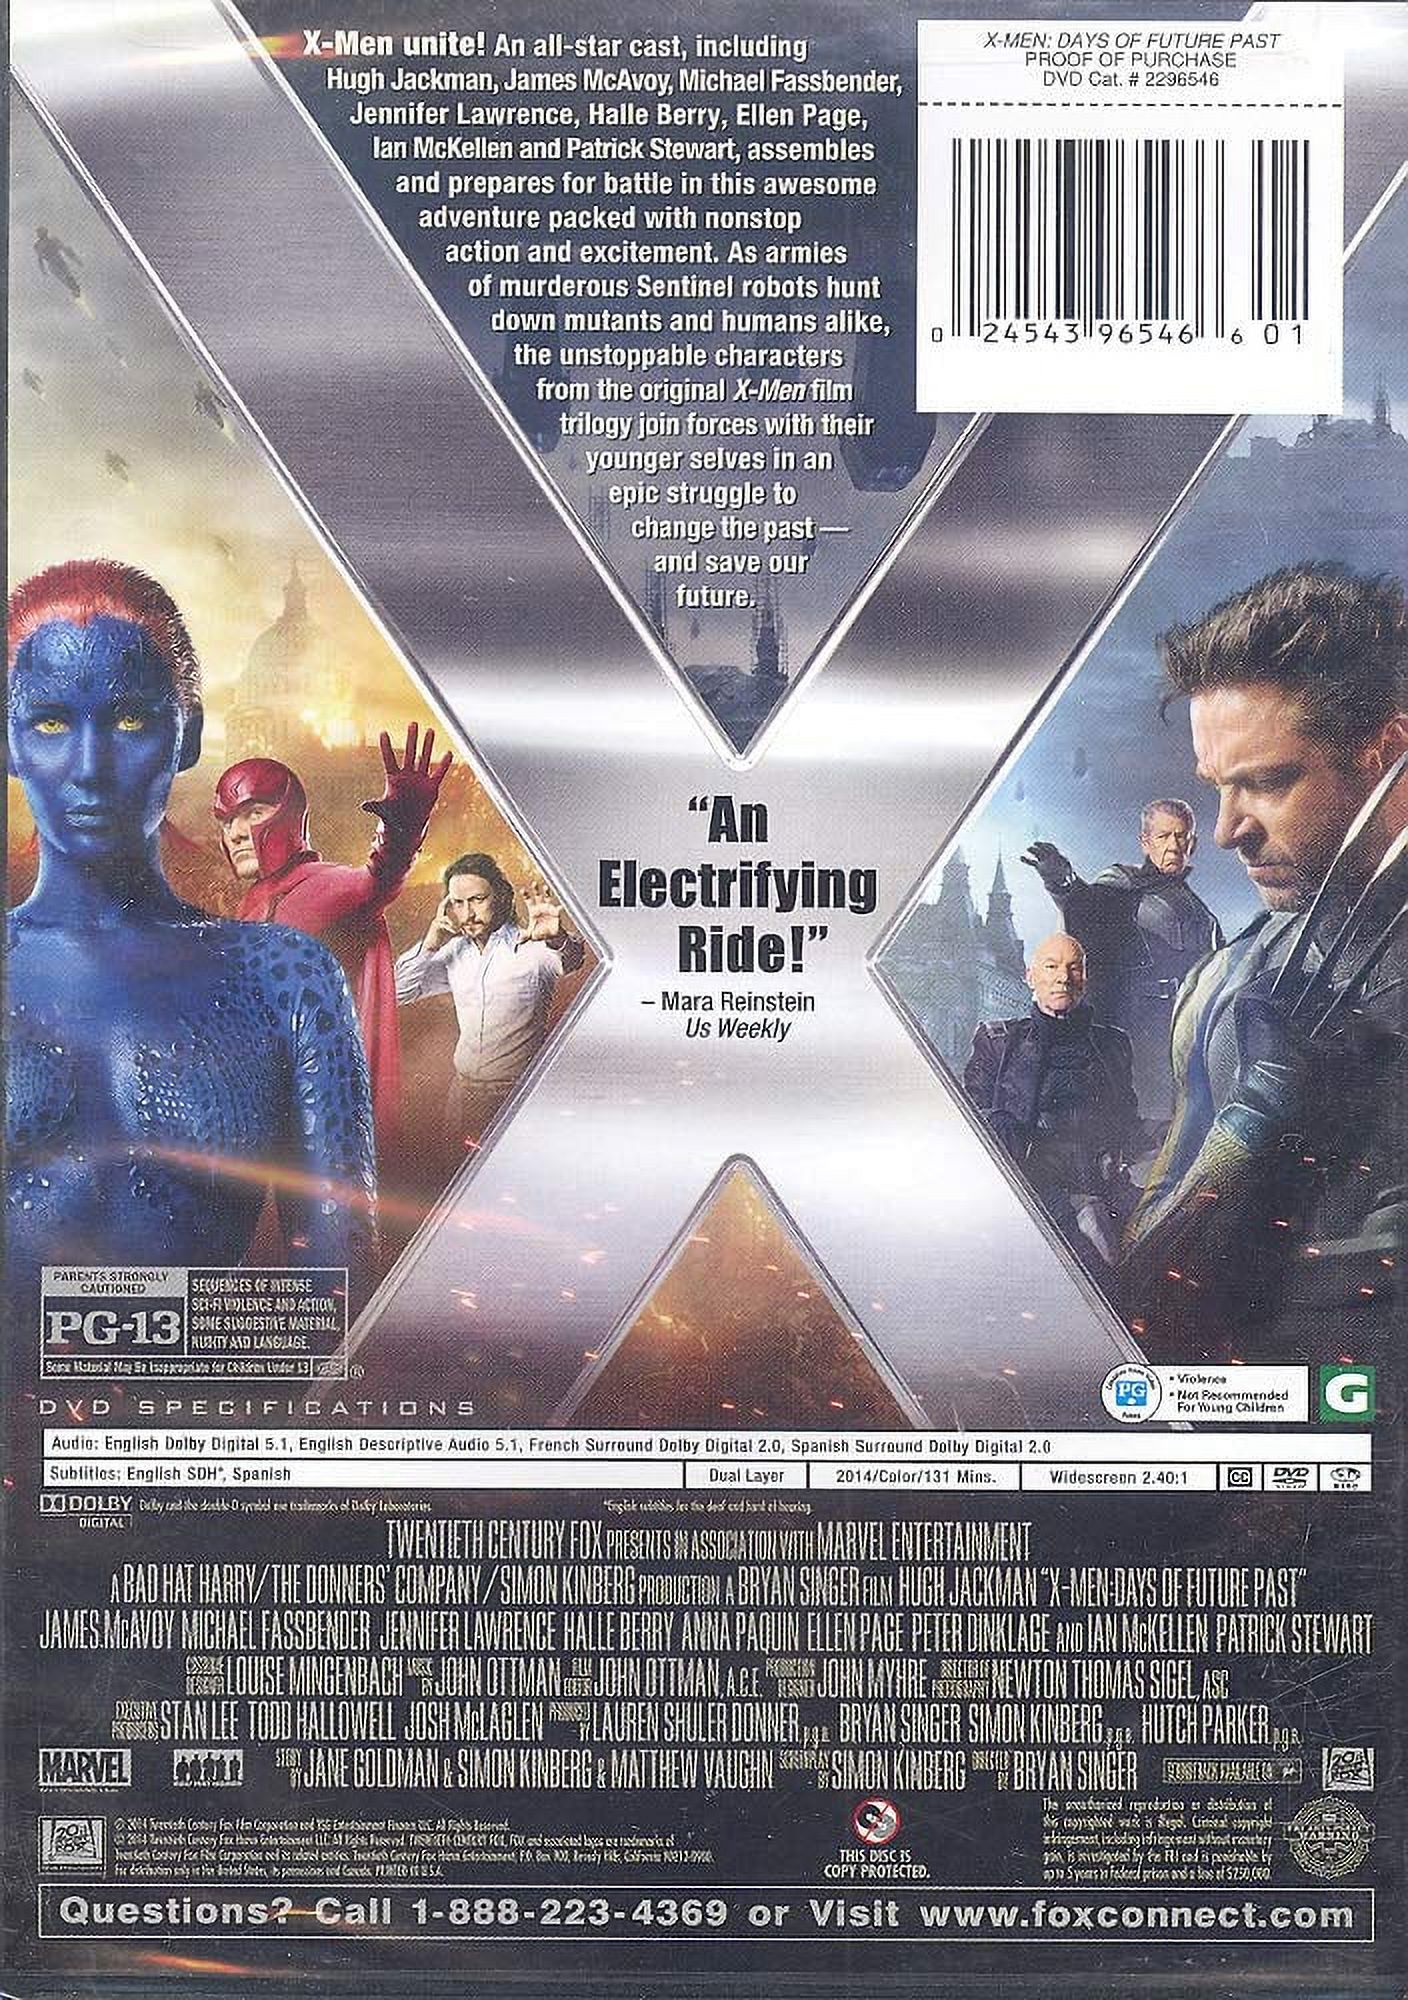 X-Men: Days Of Future Past (Widescreen) (DVD) - image 2 of 2